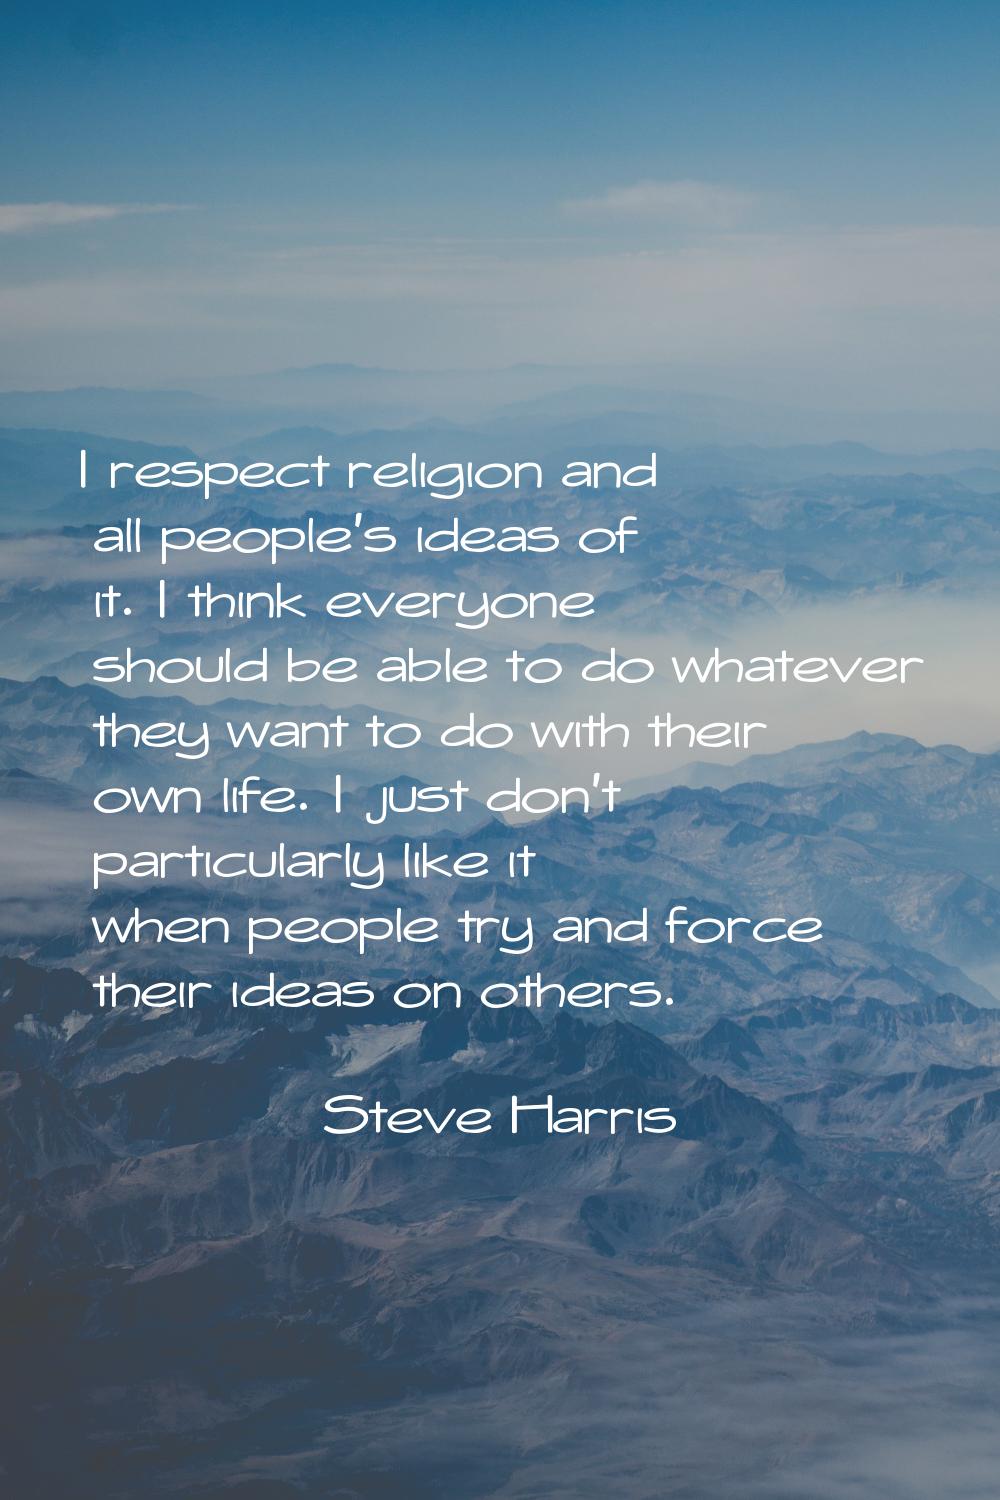 I respect religion and all people’s ideas of it. I think everyone should be able to do whatever the